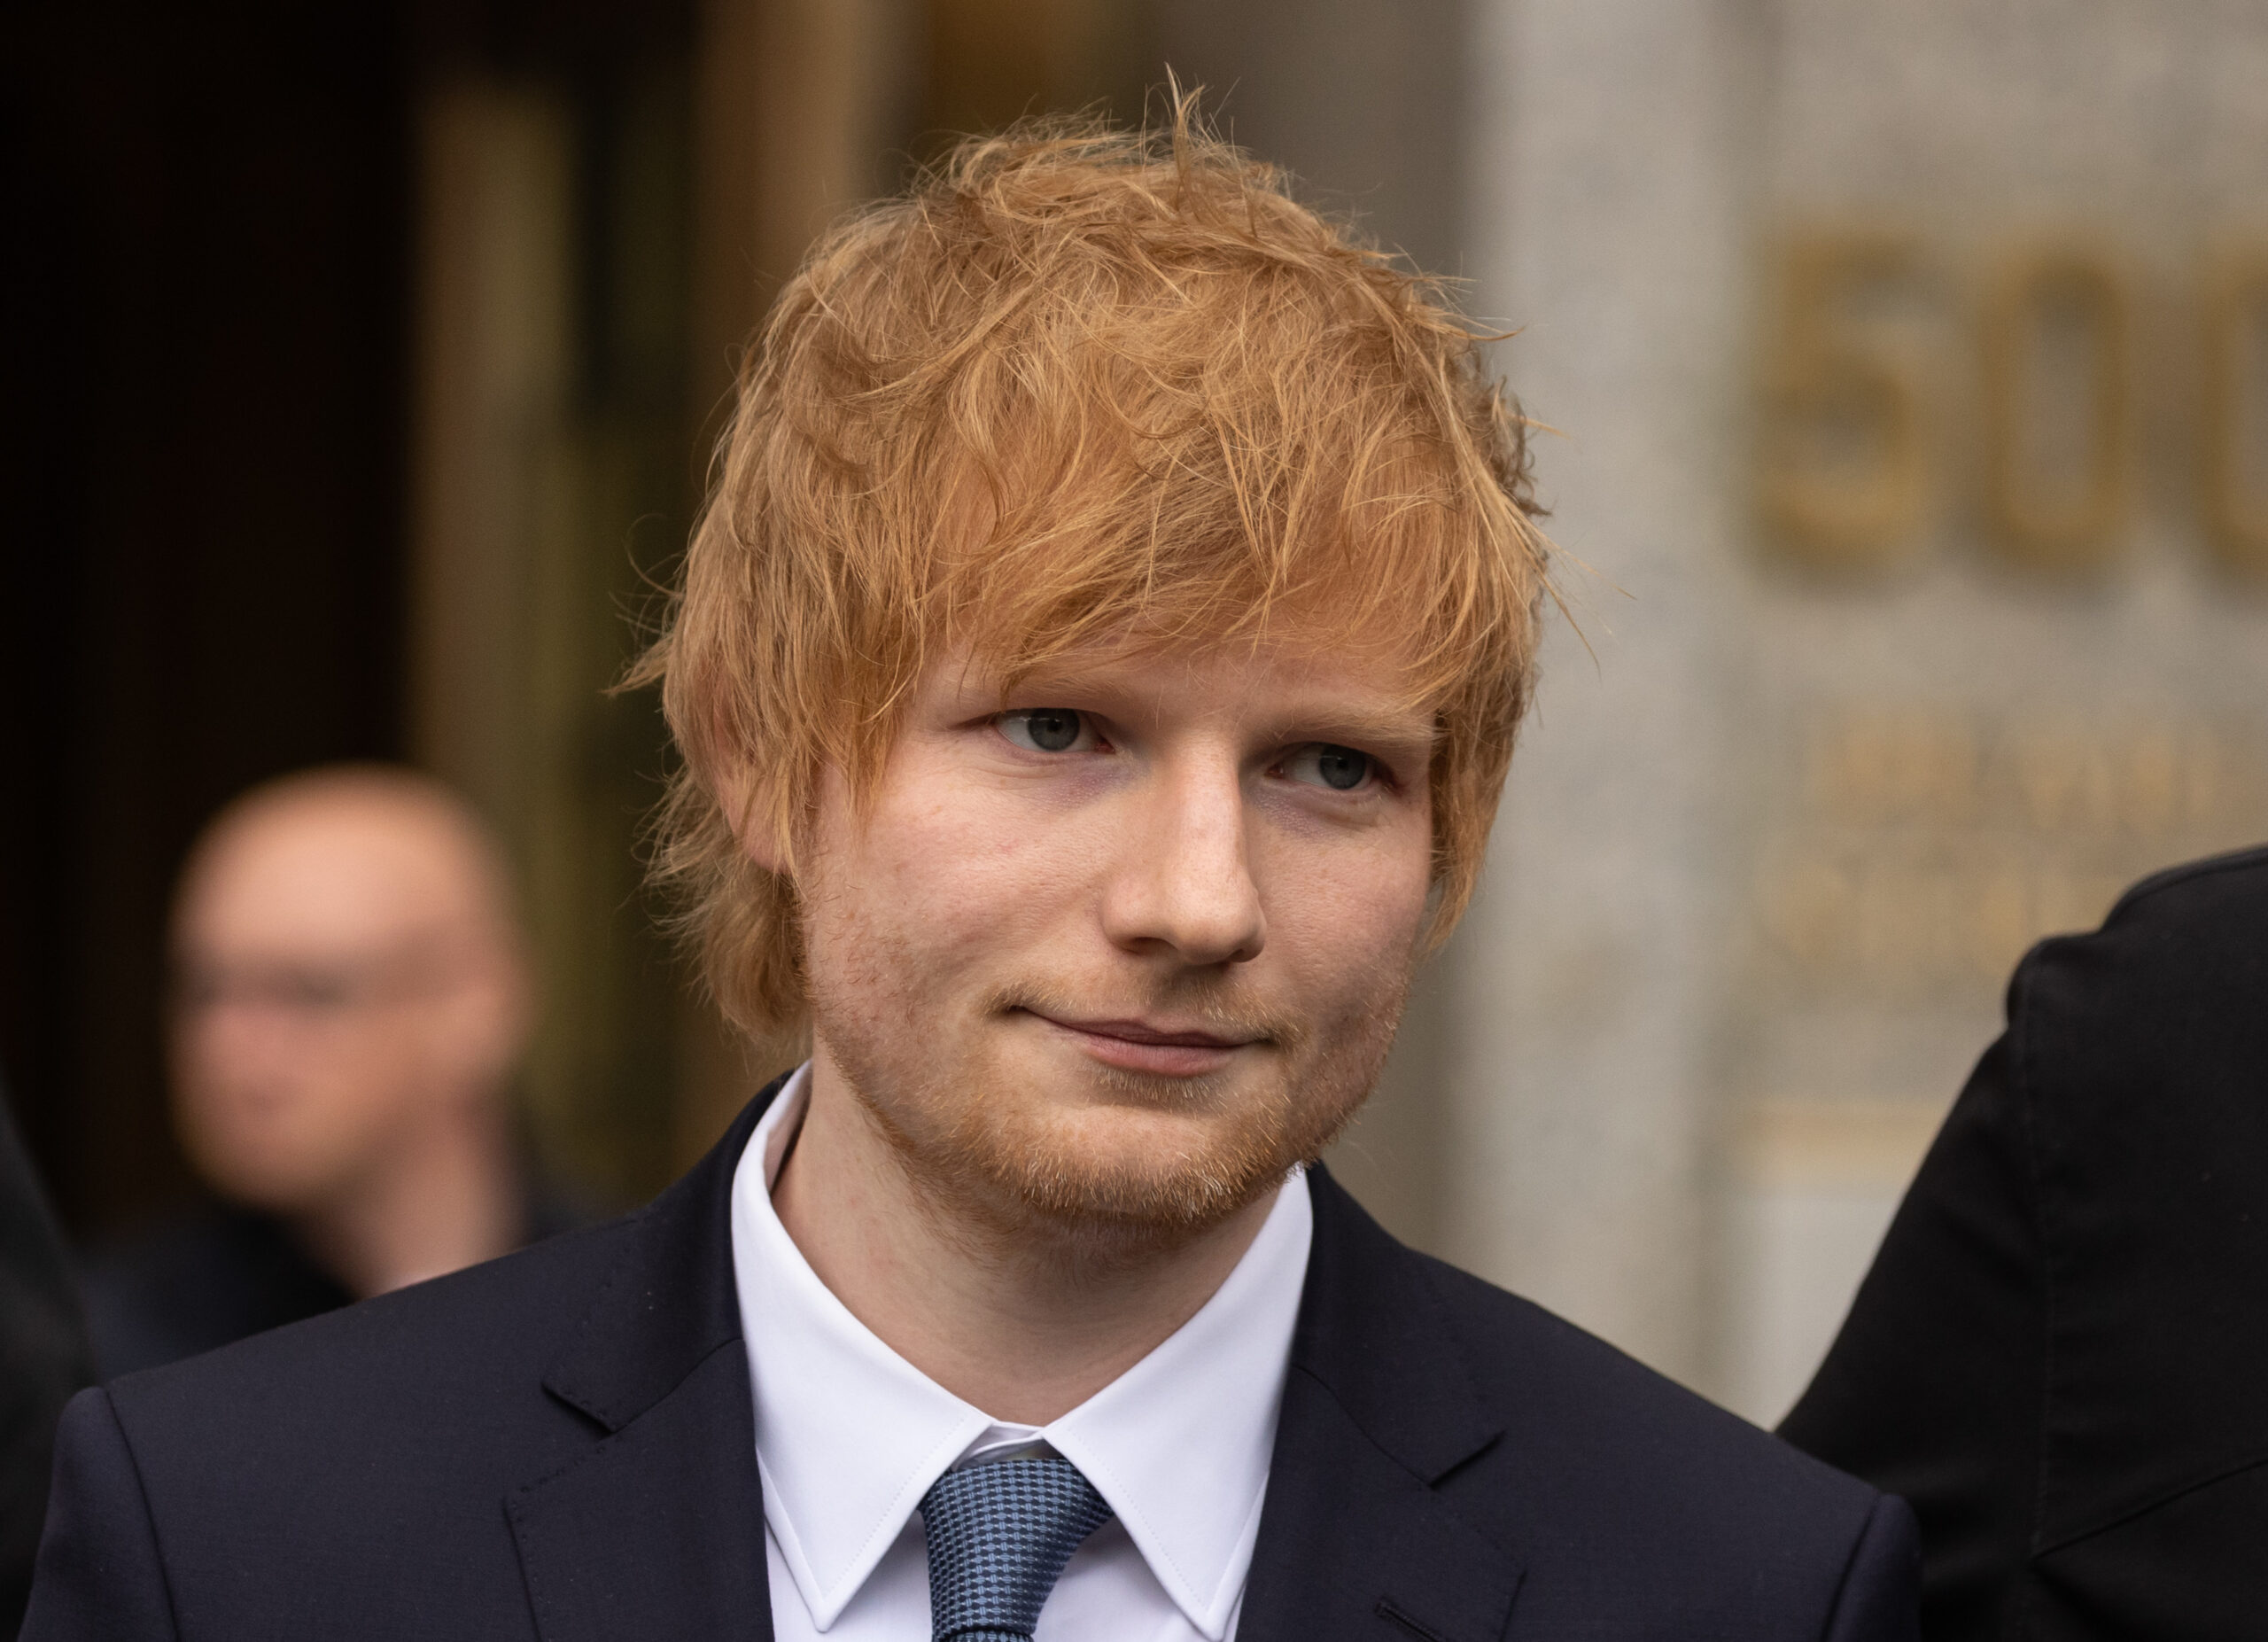 Ed Sheeran Testifies In Copyright Case: ‘Would’ve Been An Idiot’ To Openly Flaunt Stealing ‘Let’s Get It On’